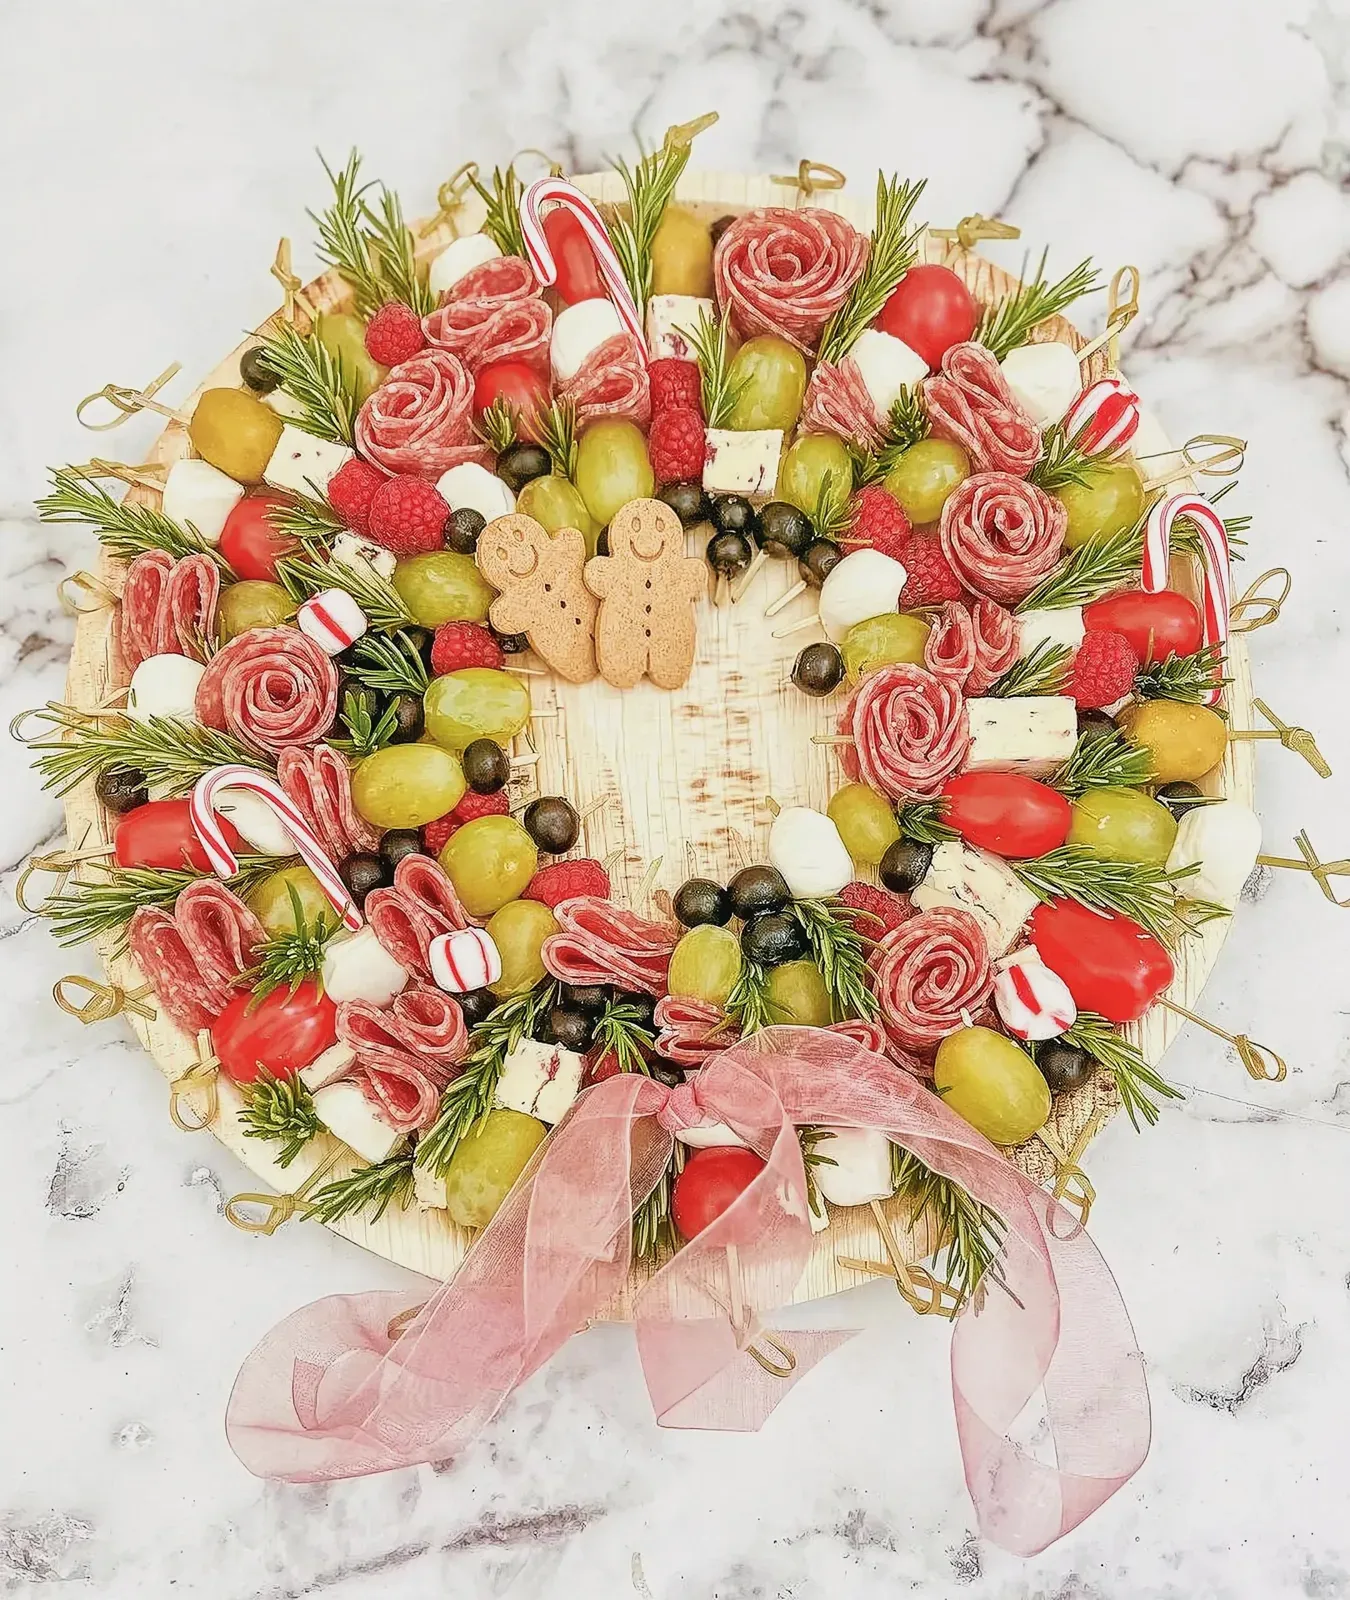 Beautifully arranged holiday platter with gingerbread men, grapes, marshmallows, melon, and strawberries